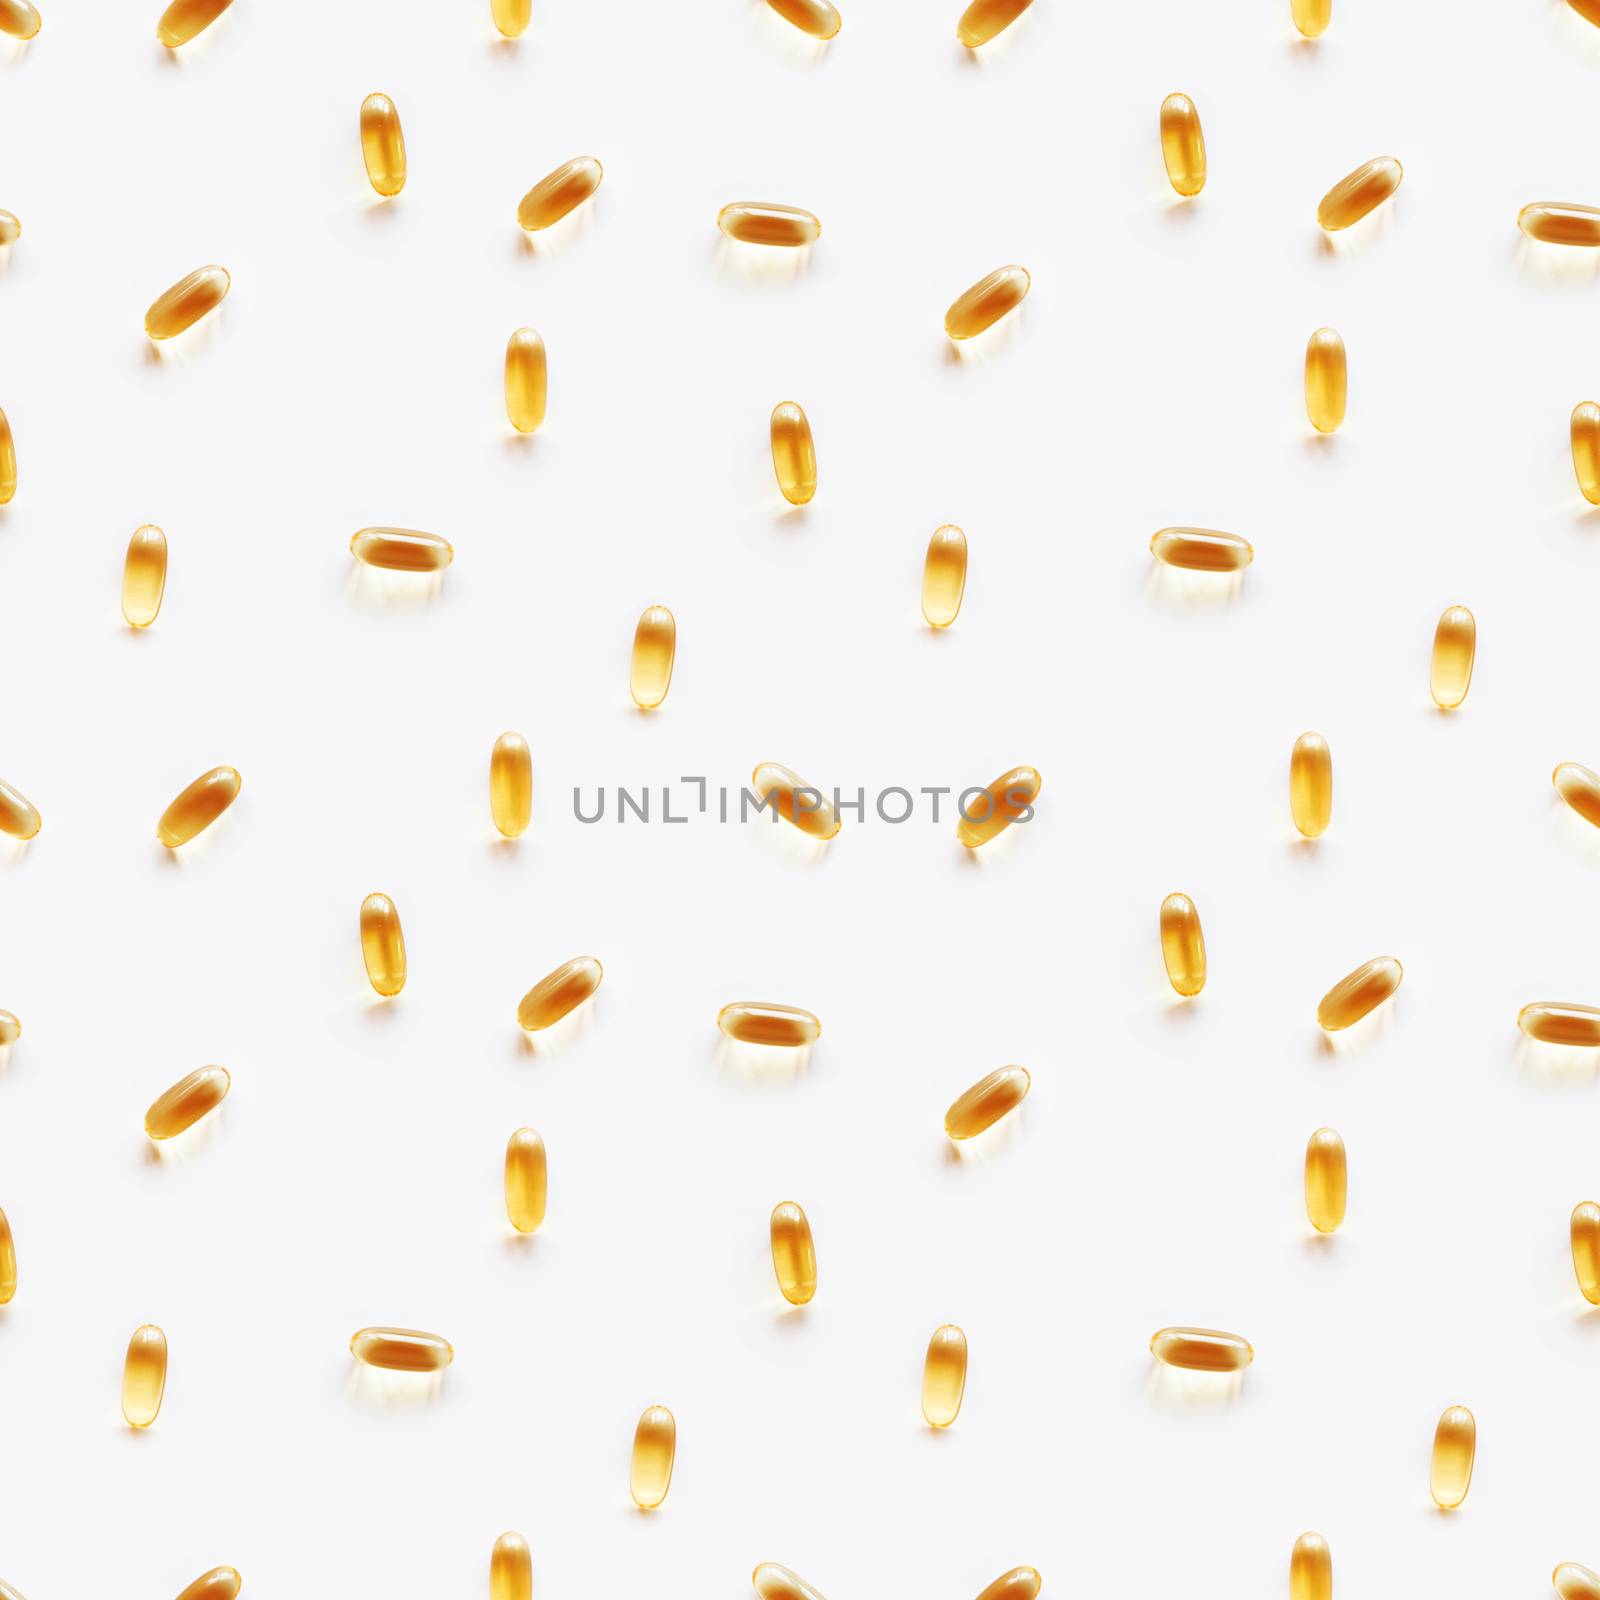 Seamless photo pattern with bright yellow capsules. White background with spilled yellow pills.